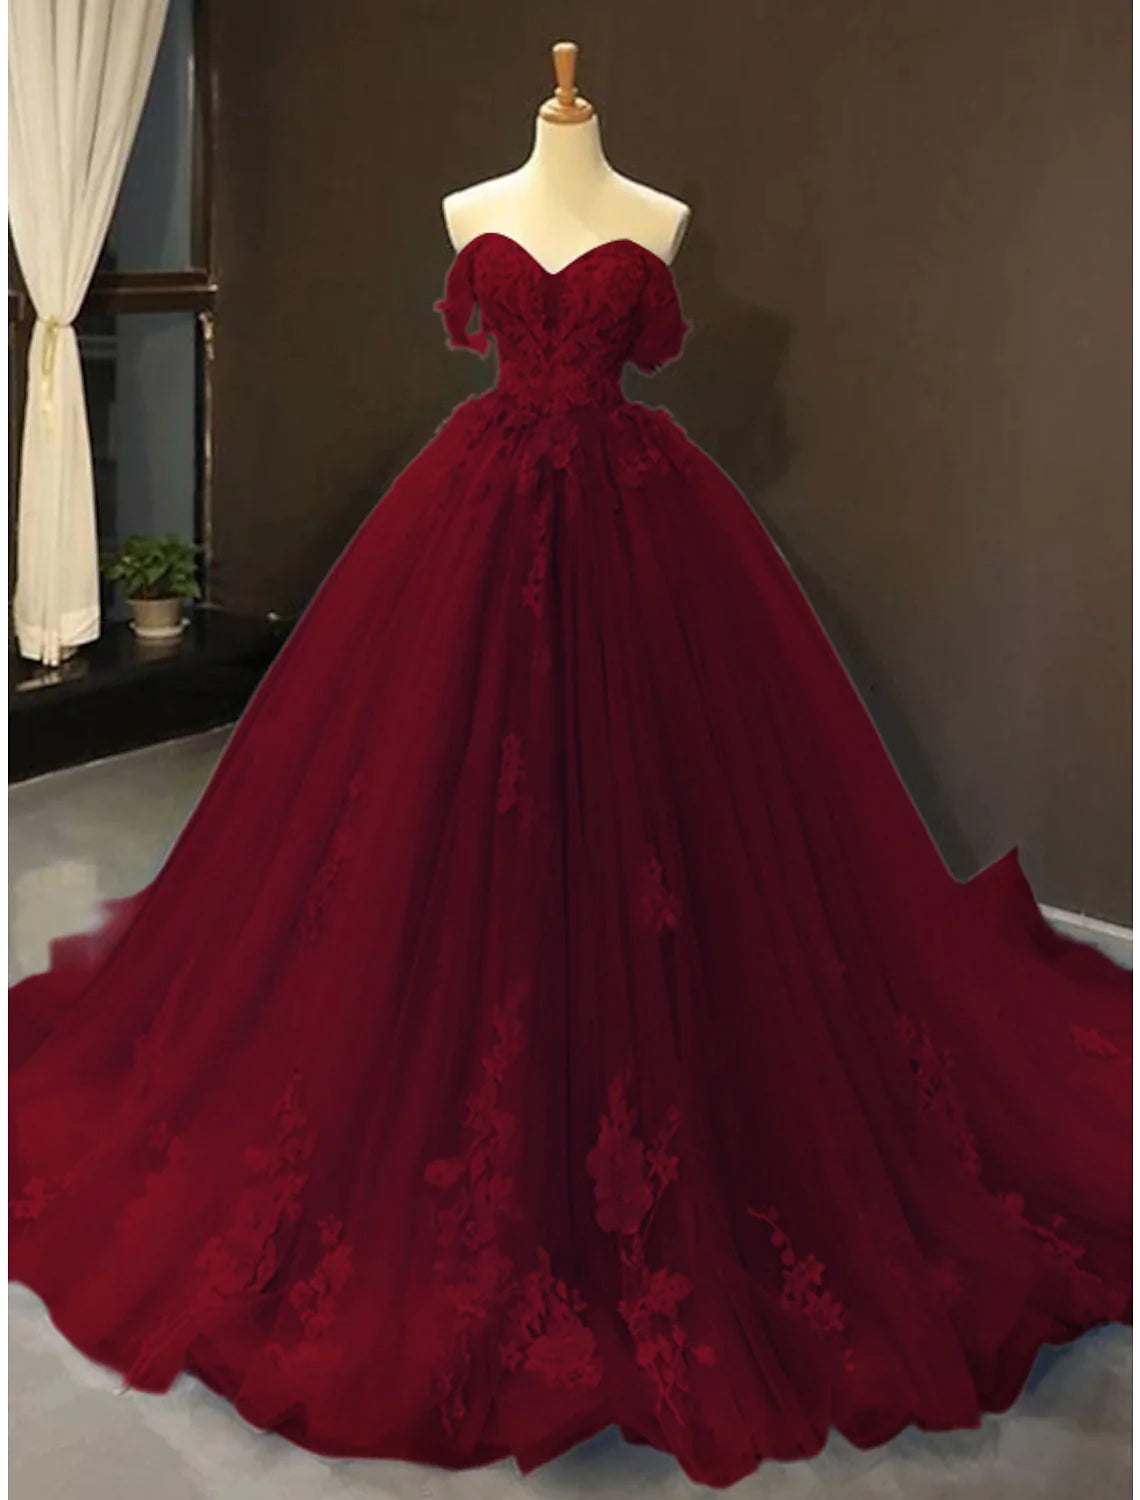 Ball Gown Prom Dresses Floral Dress Wedding Quinceanera Court Train Short Sleeve Sweetheart Lace with Pleats Appliques